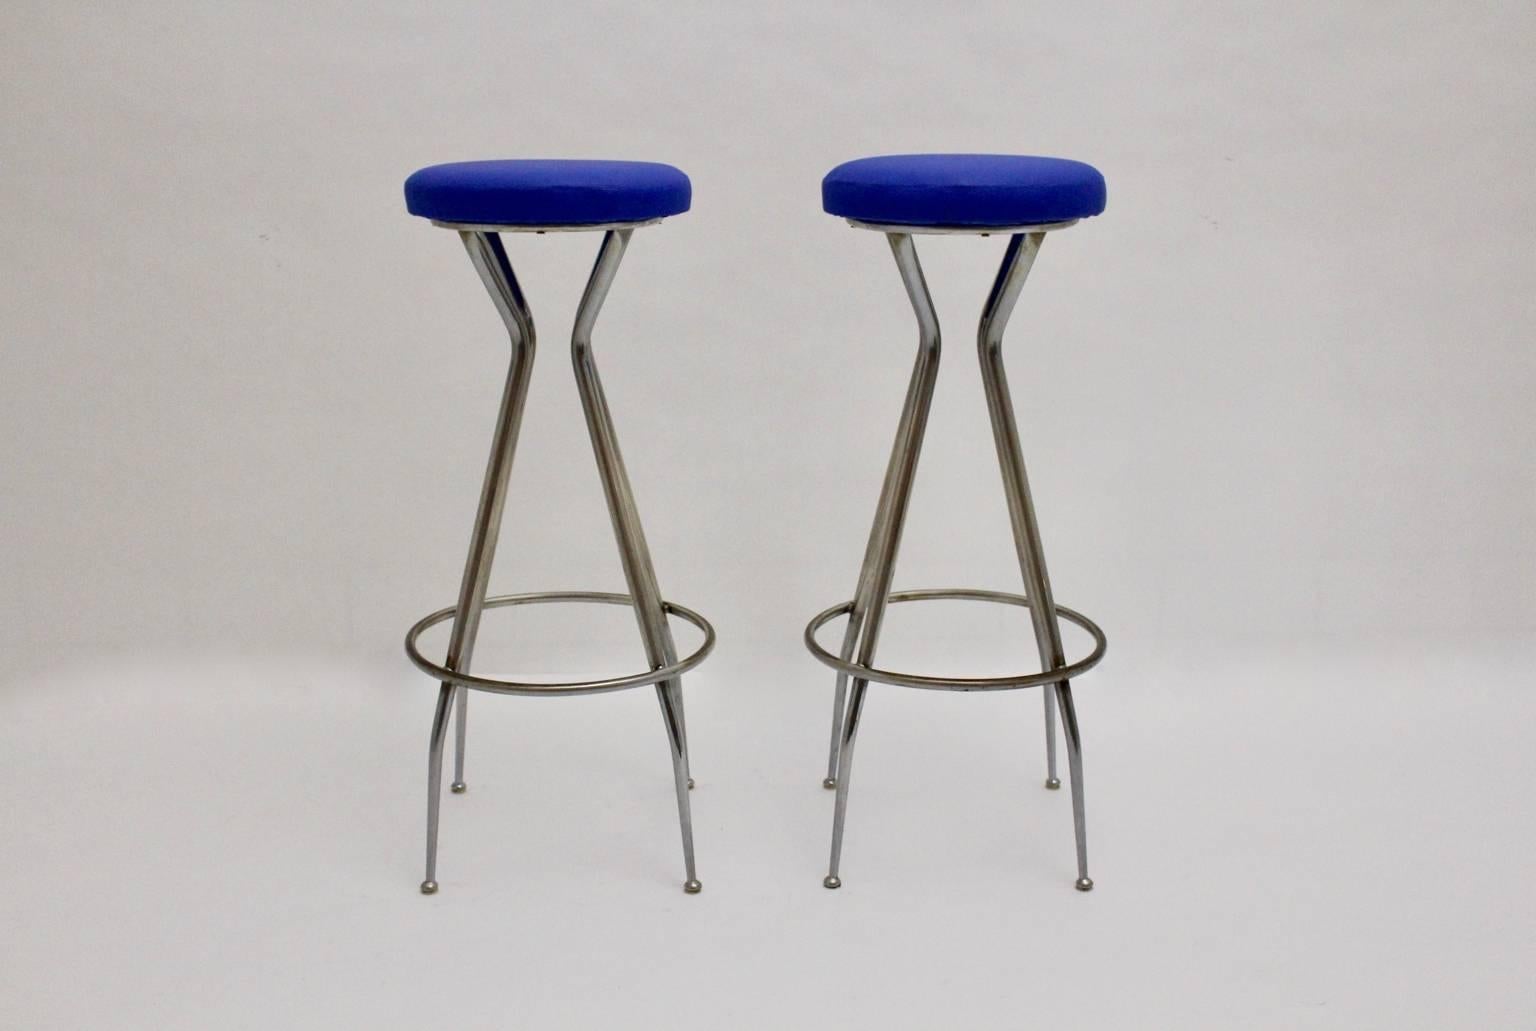 Mid Century Modern vintage set of 2 barstools 1950s Austria.
While the base from chromed tube steel the seats are covered with blue faux leather.
The condition is good.
The seats are in very good condition. The base shows some signs of age and use